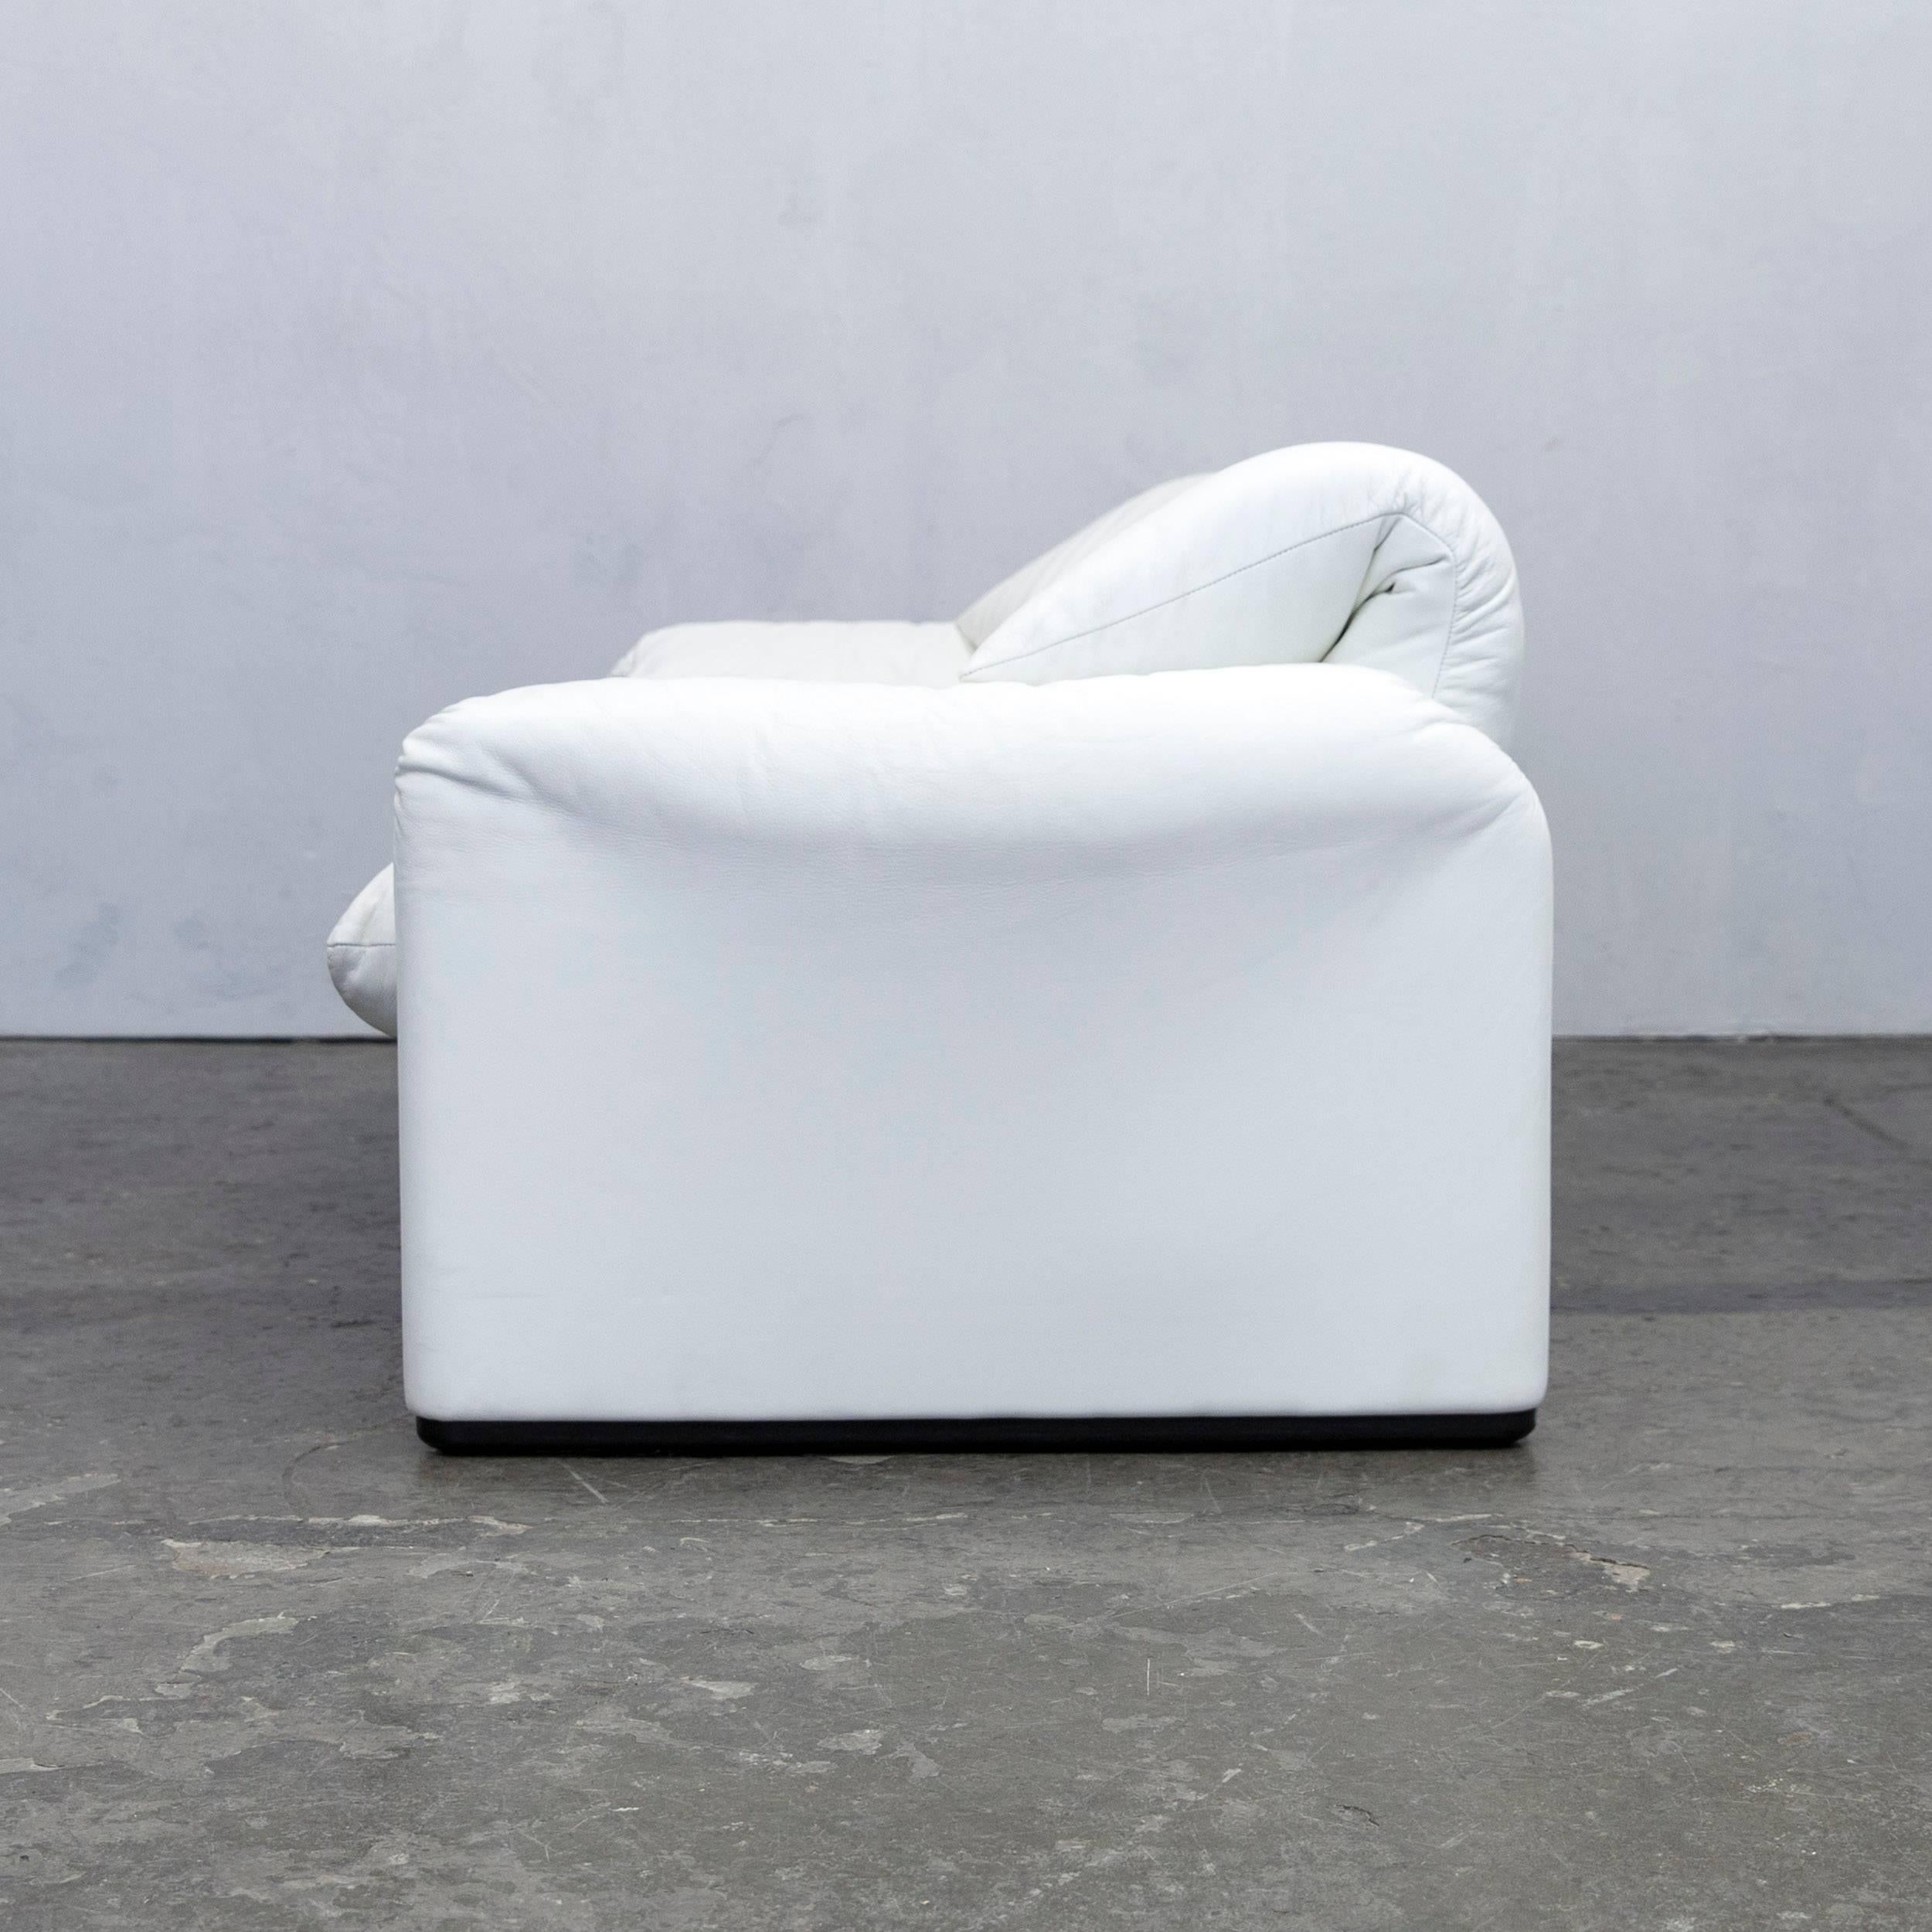 Cassina Maralunga Designer Sofa Leather White Two-Seat Function Couch Modern 4